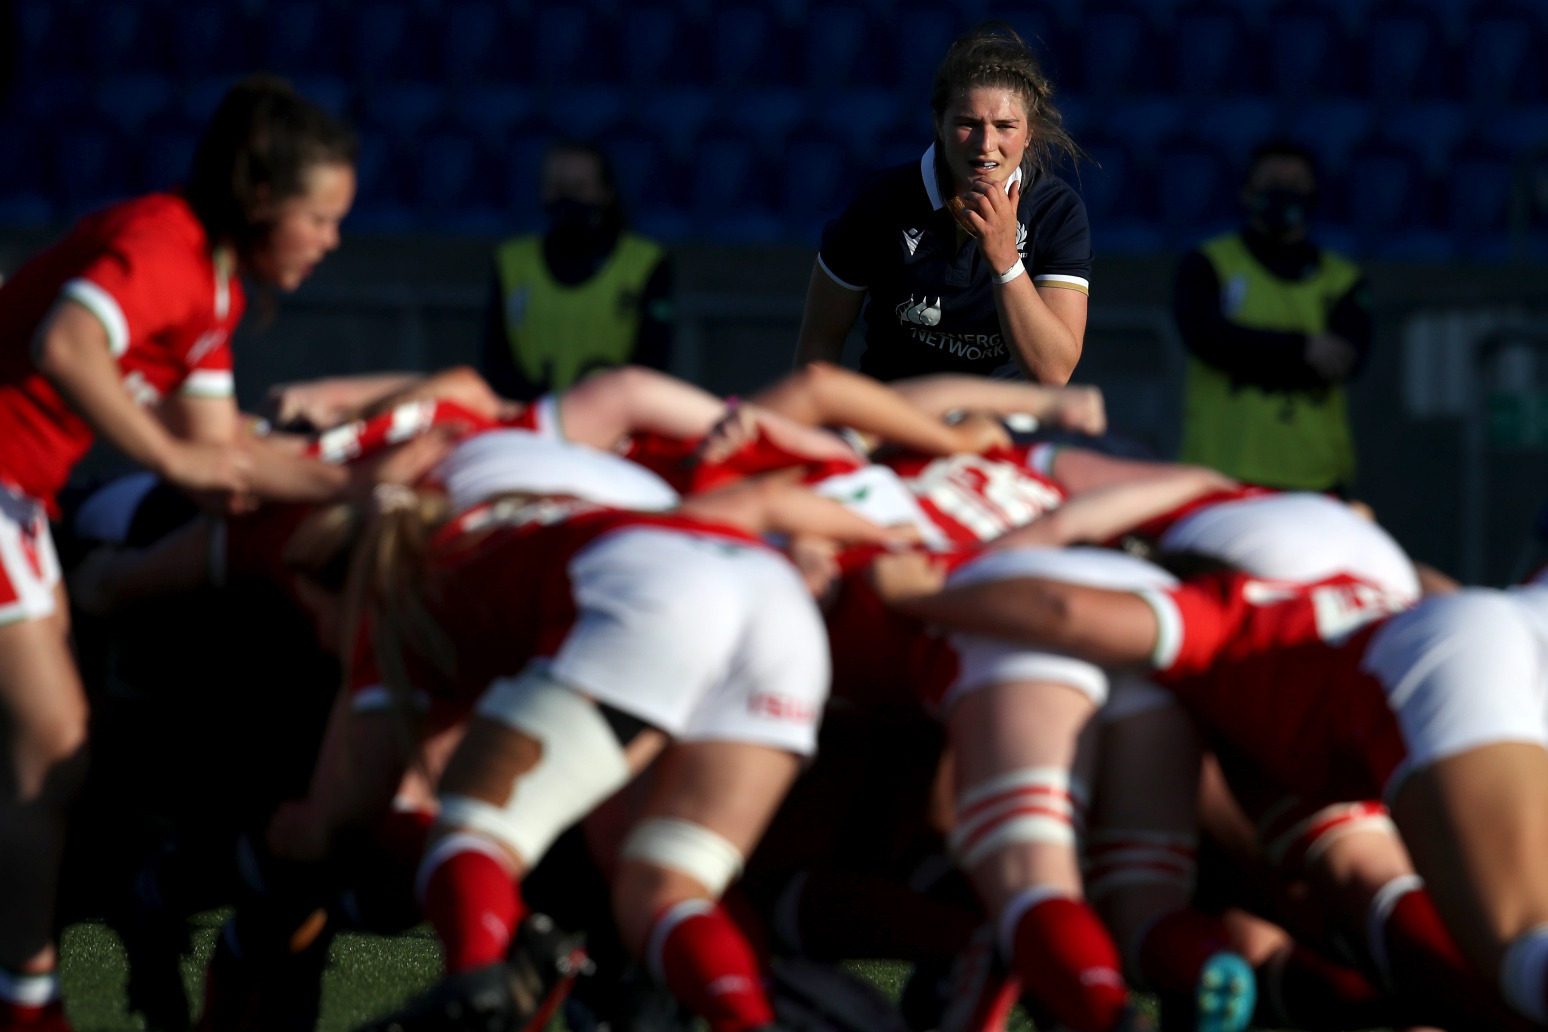 RFU launches bid to host 2025 Women’s World Cup in England 